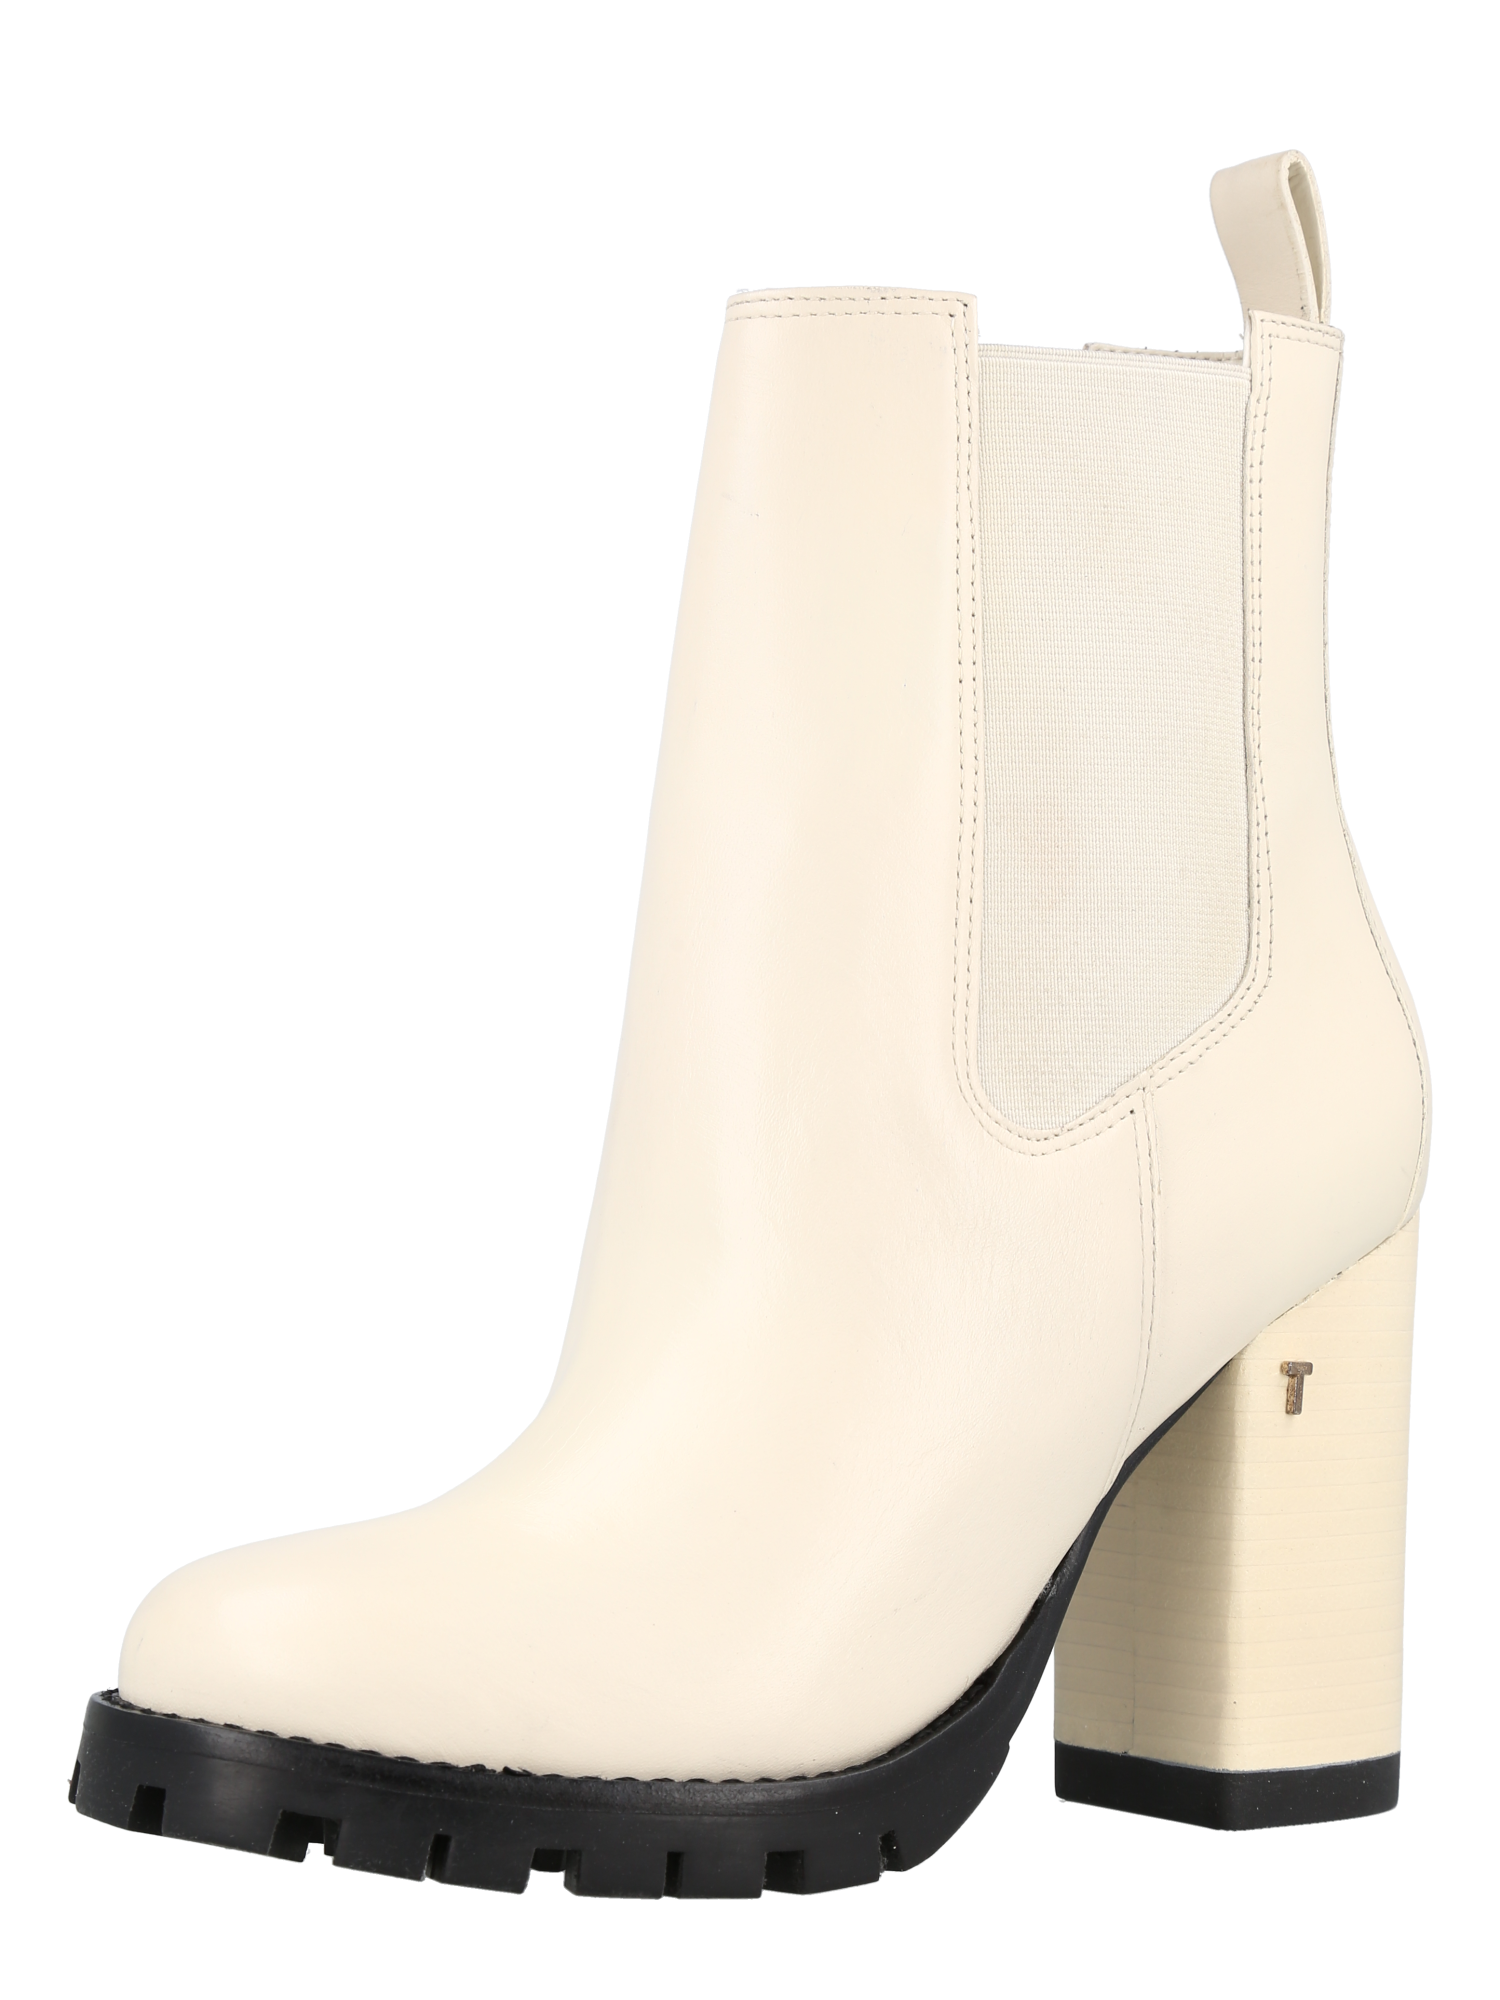 orosk Donna Ted Baker Boots chelsea Jaymea in Crema 